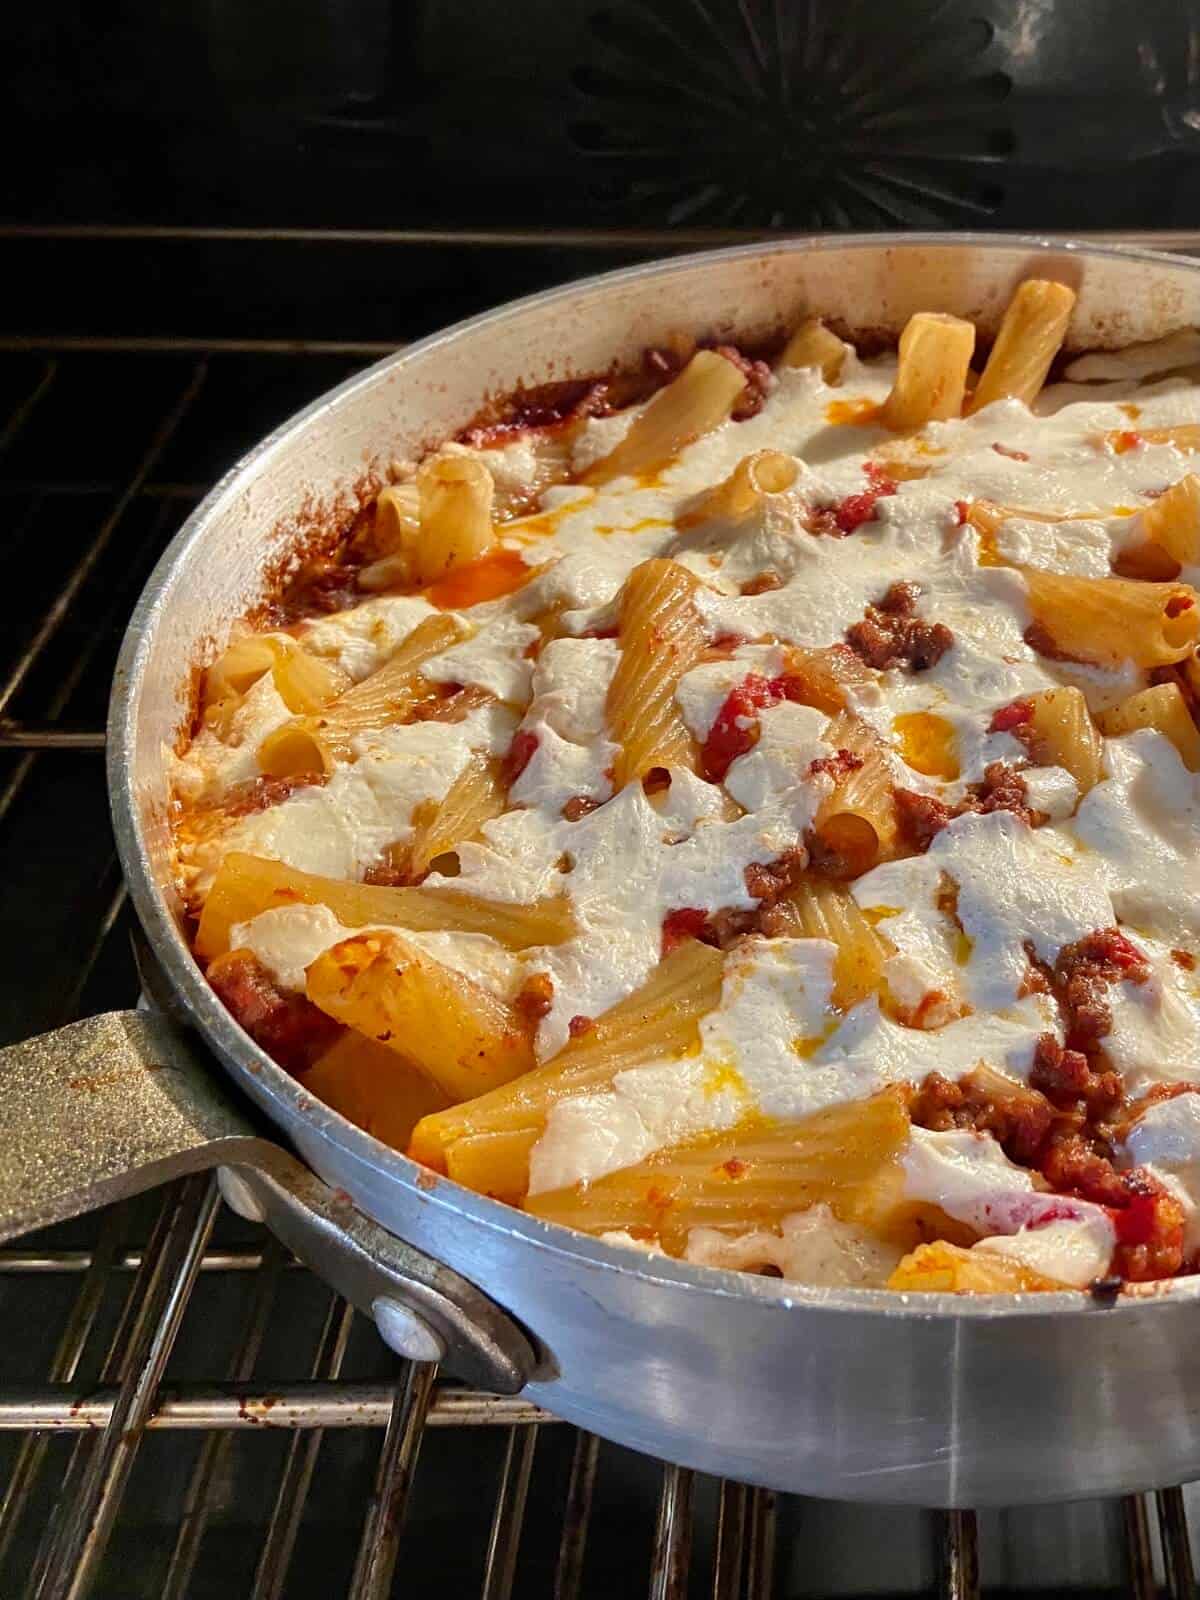 Baked pasta with sauce and cheese in pan.